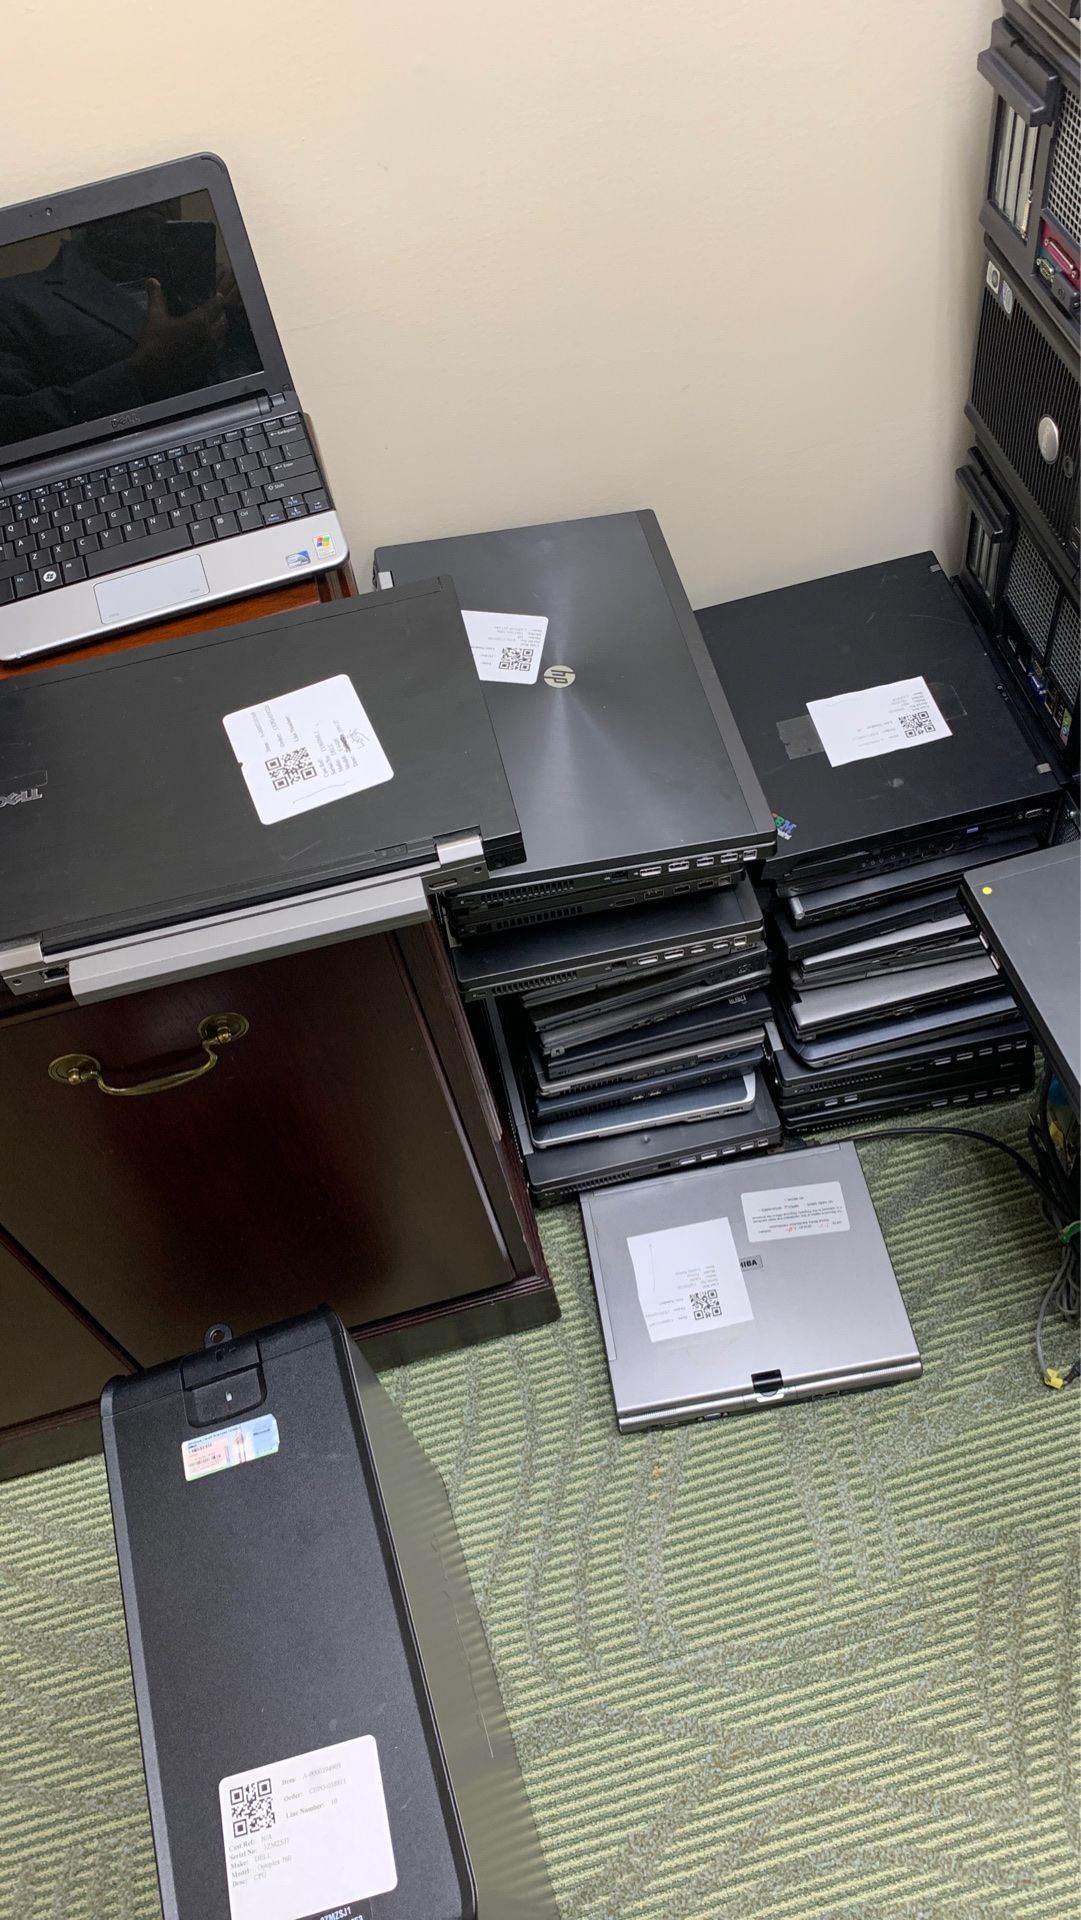 Lot of 30 Laptops and 58 cpu for sale